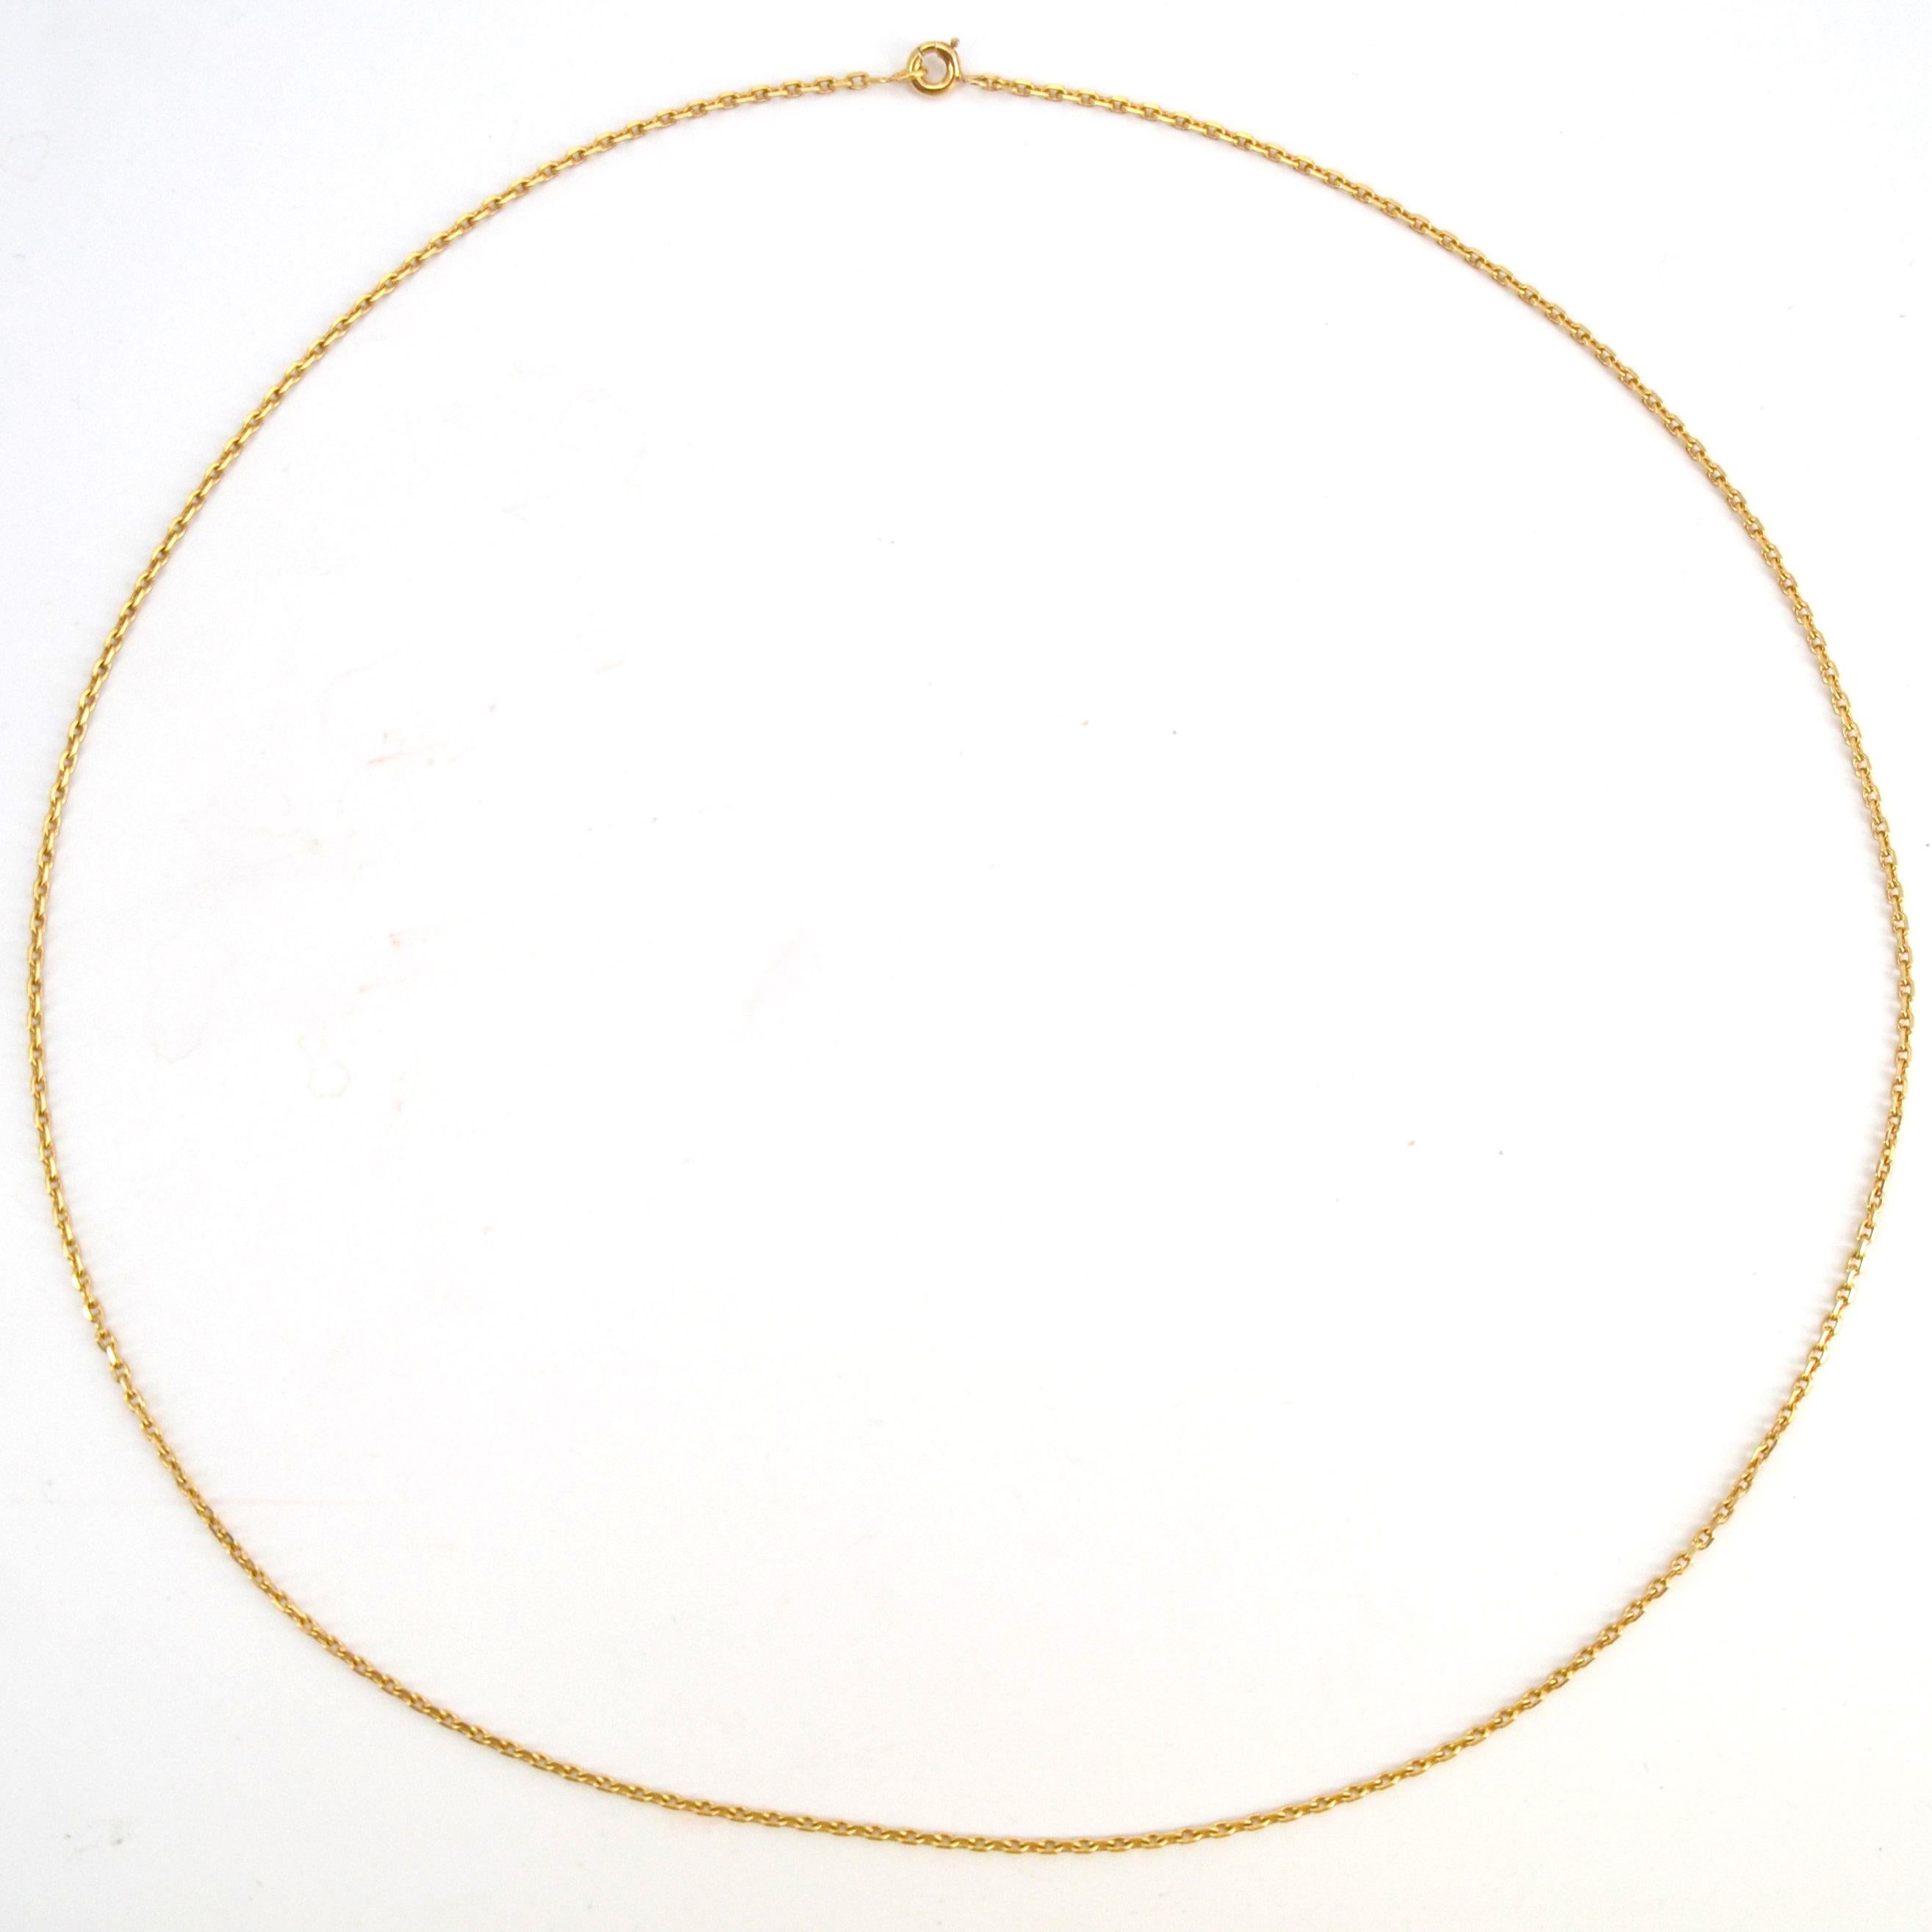 Modern 18 Karat Yellow Gold Filed Convict Mesh Chain In Excellent Condition For Sale In Poitiers, FR